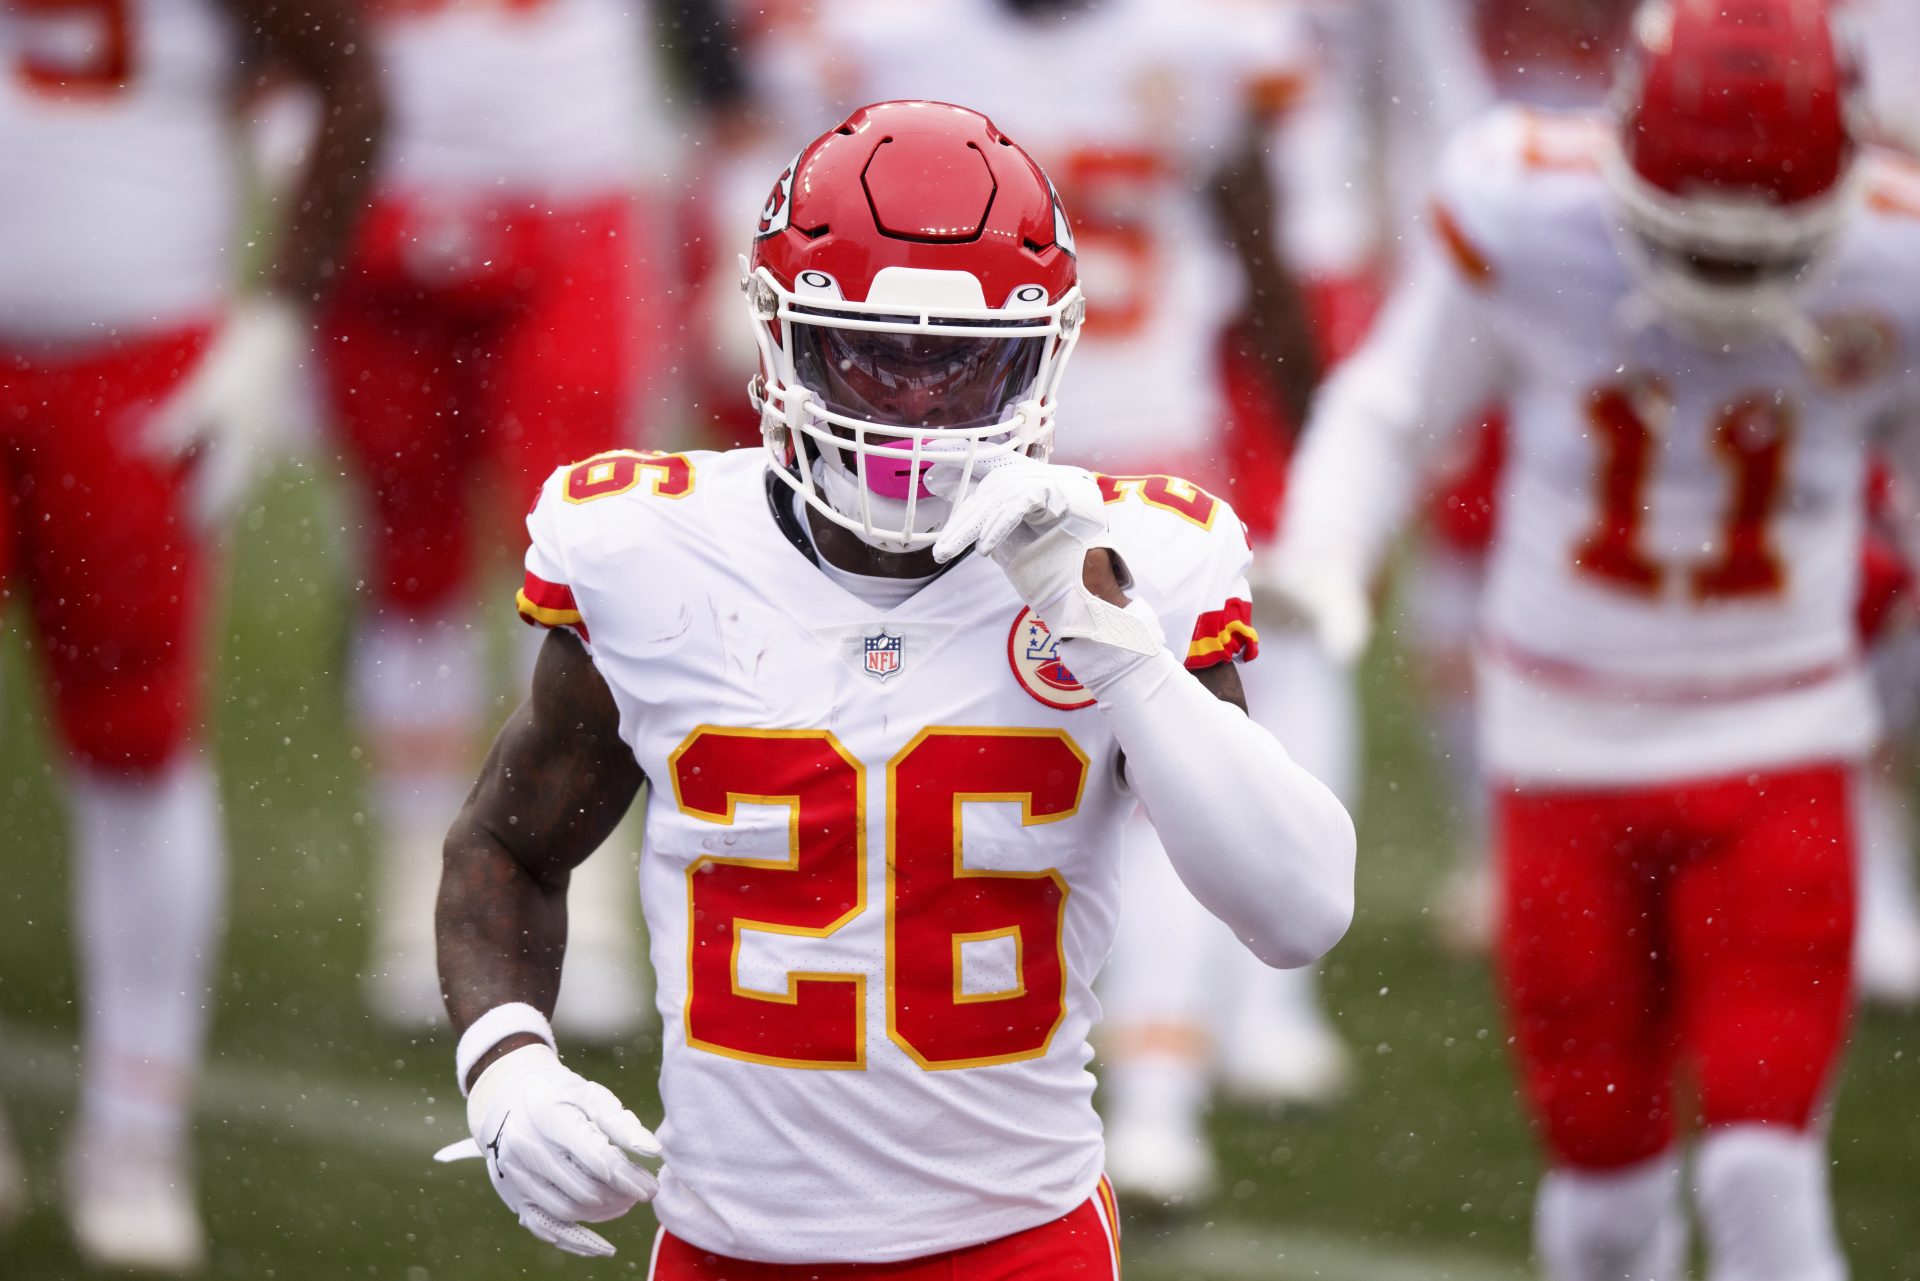 Gape: Le’Veon Bell with a 16-yard impact on his first dart with the Chiefs